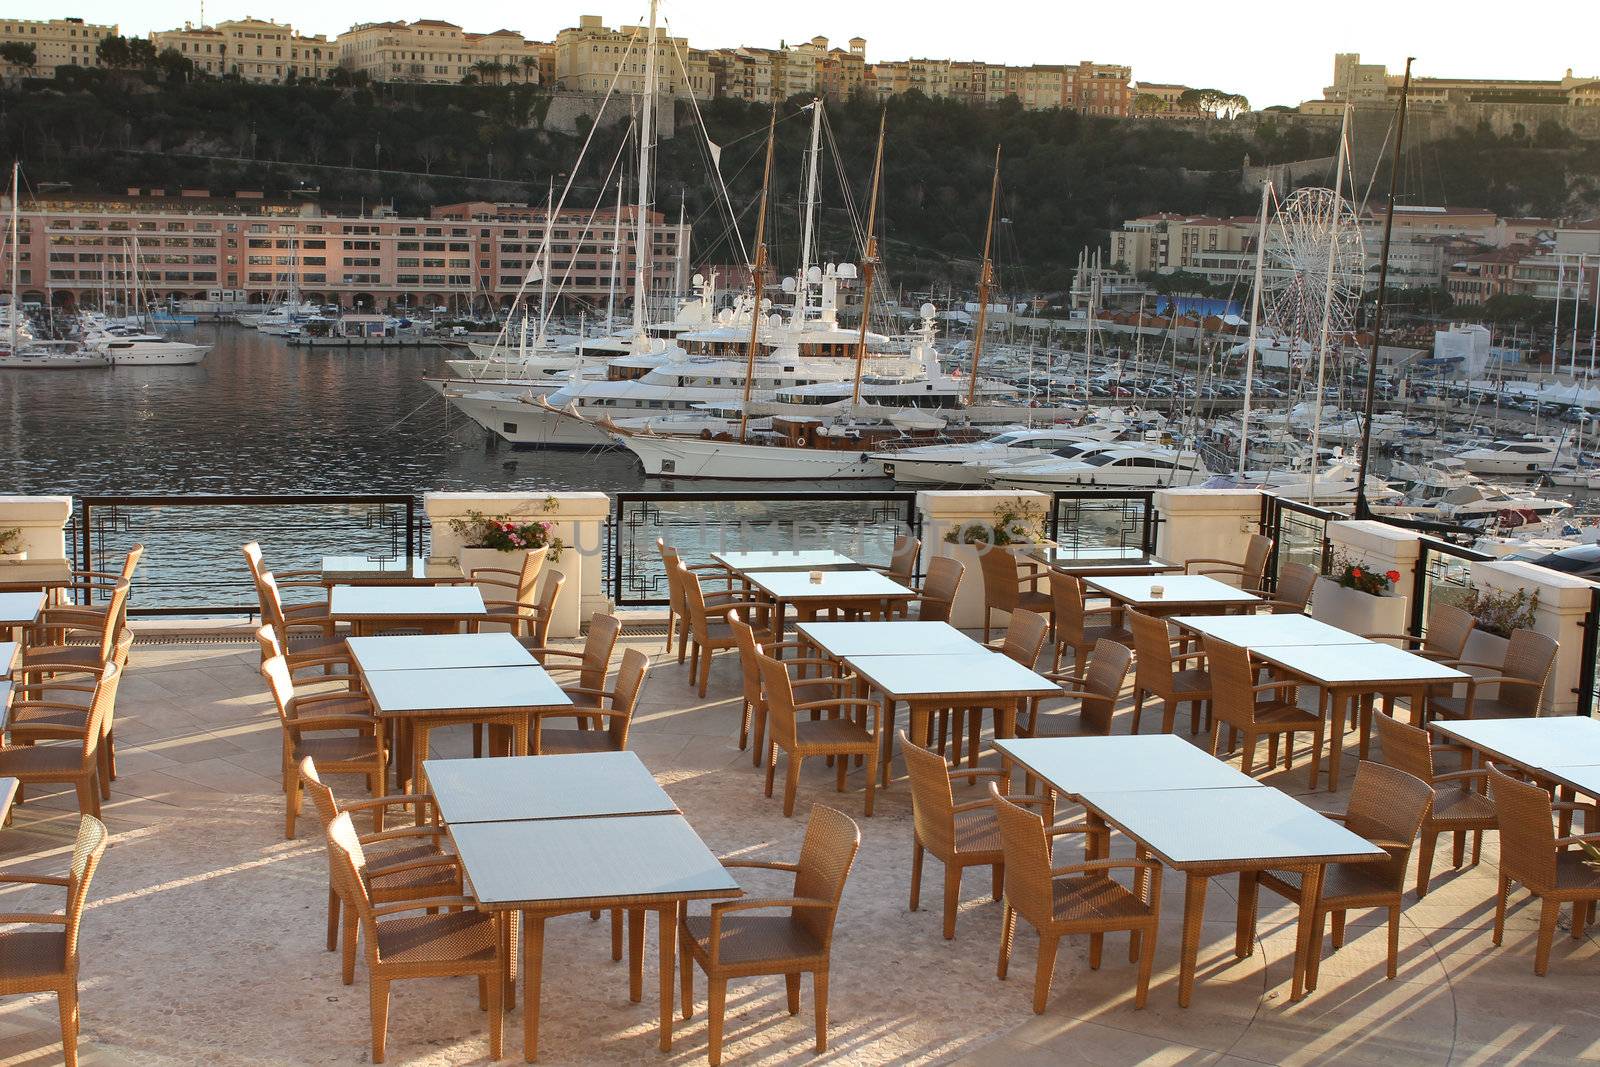 Restaurant at the harbor of monaco by dwaschnig_photo